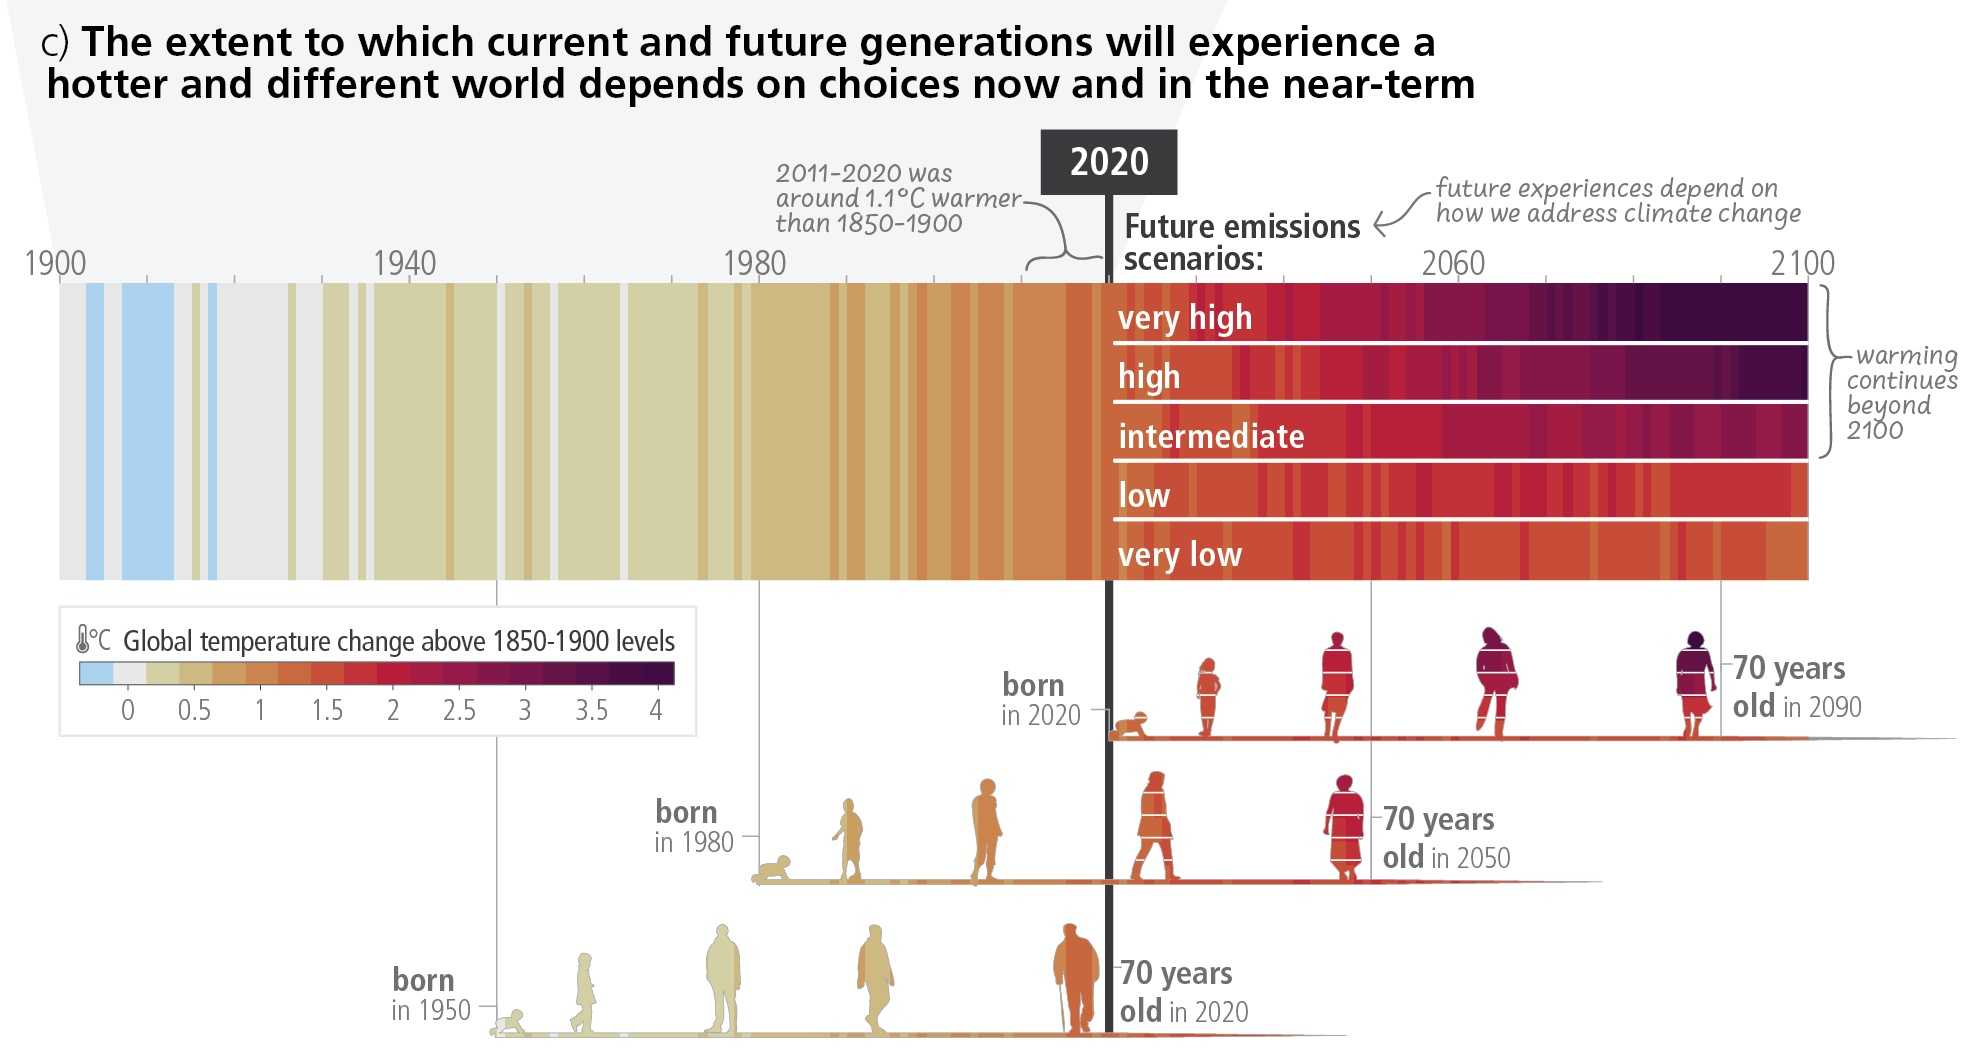 IPCC AR6 SYR SPM - Figure 1 - The extent to which current and future generations will experience a warmer and different world depends on the choices made today and in the near future.